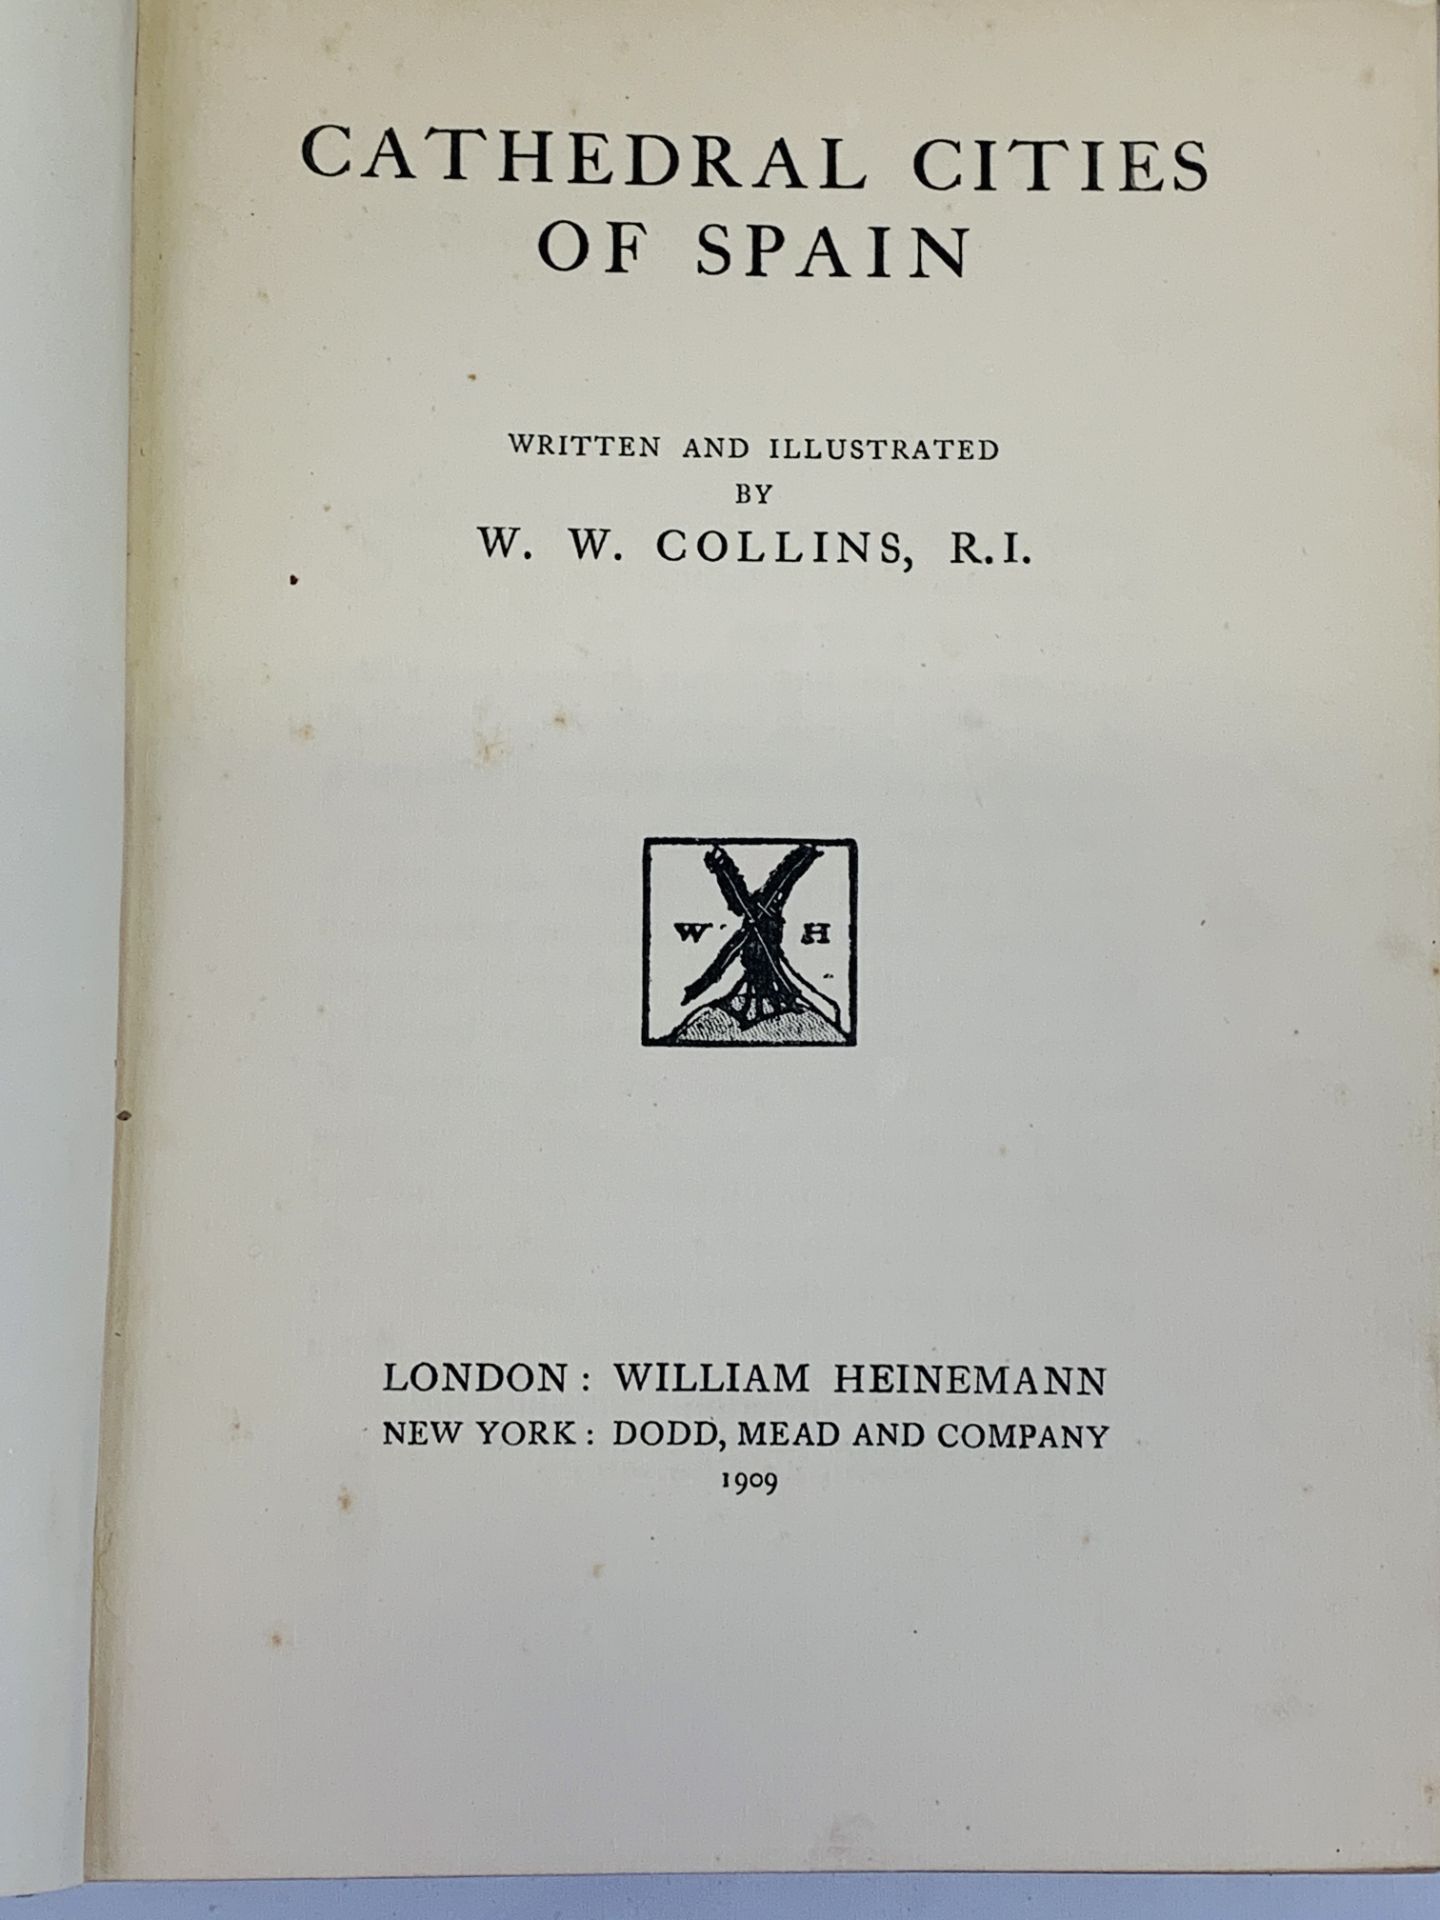 Cathedral Cities of Spain by W.W. Collins - Bild 3 aus 4